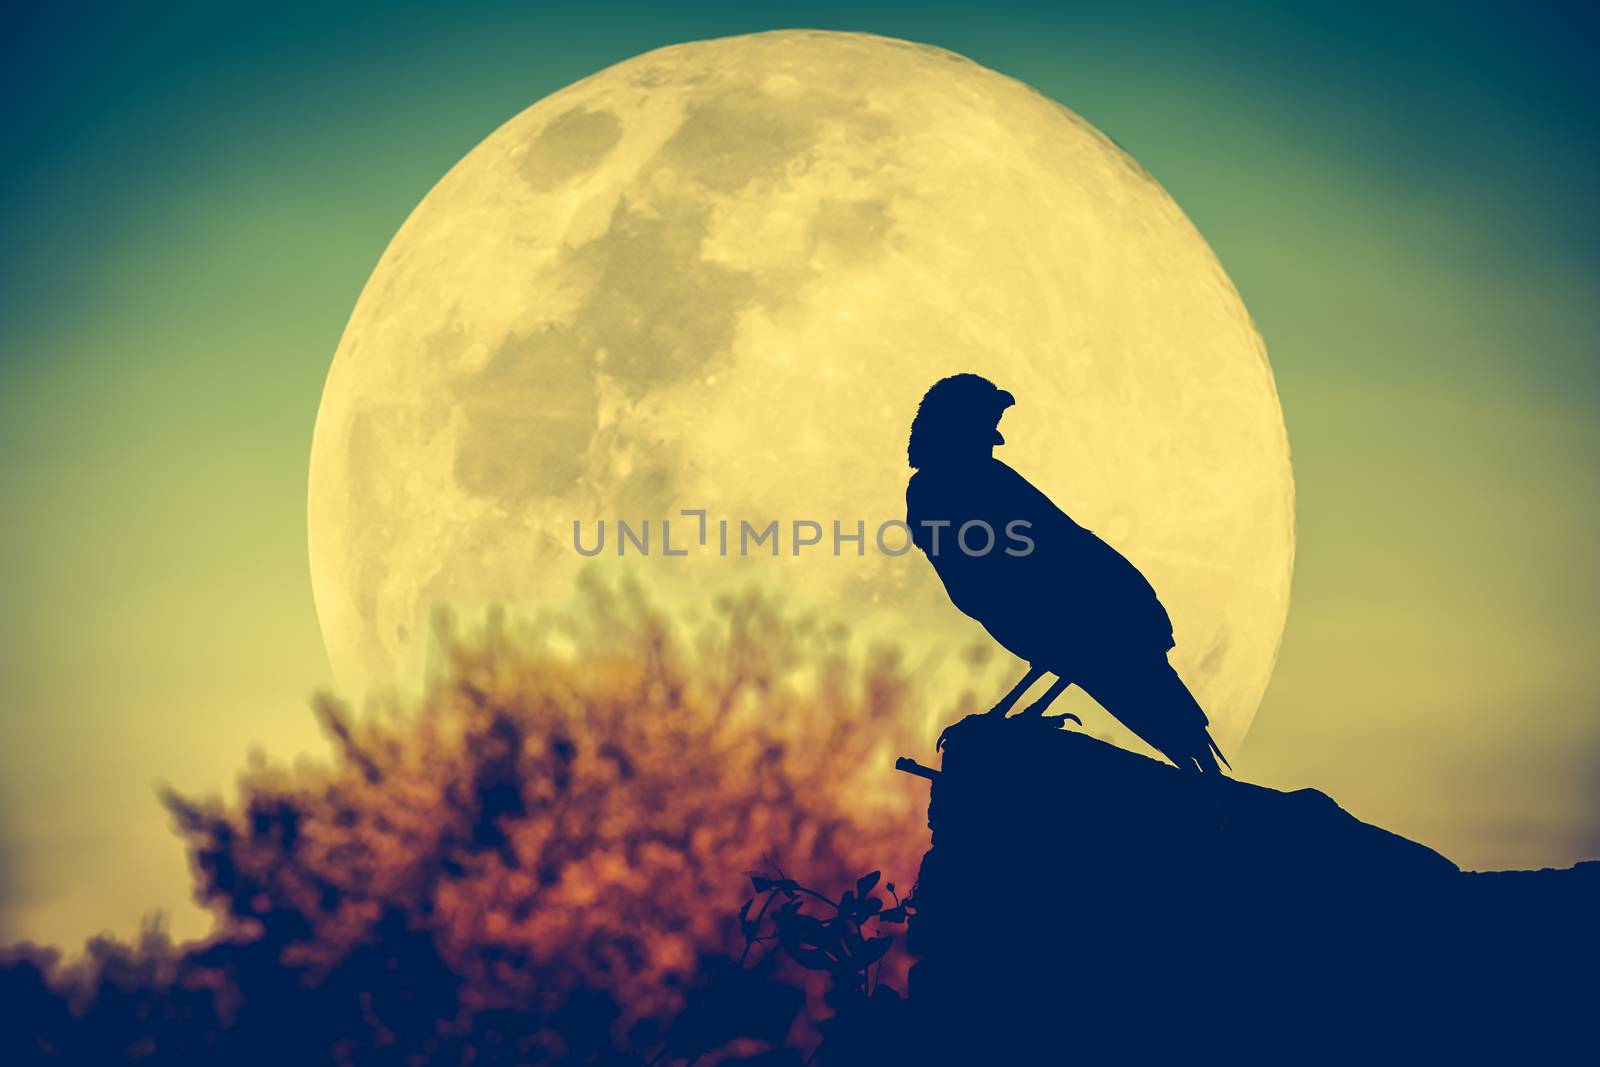 Night sky with full moon, tree and silhouette of crow that can b by kdshutterman